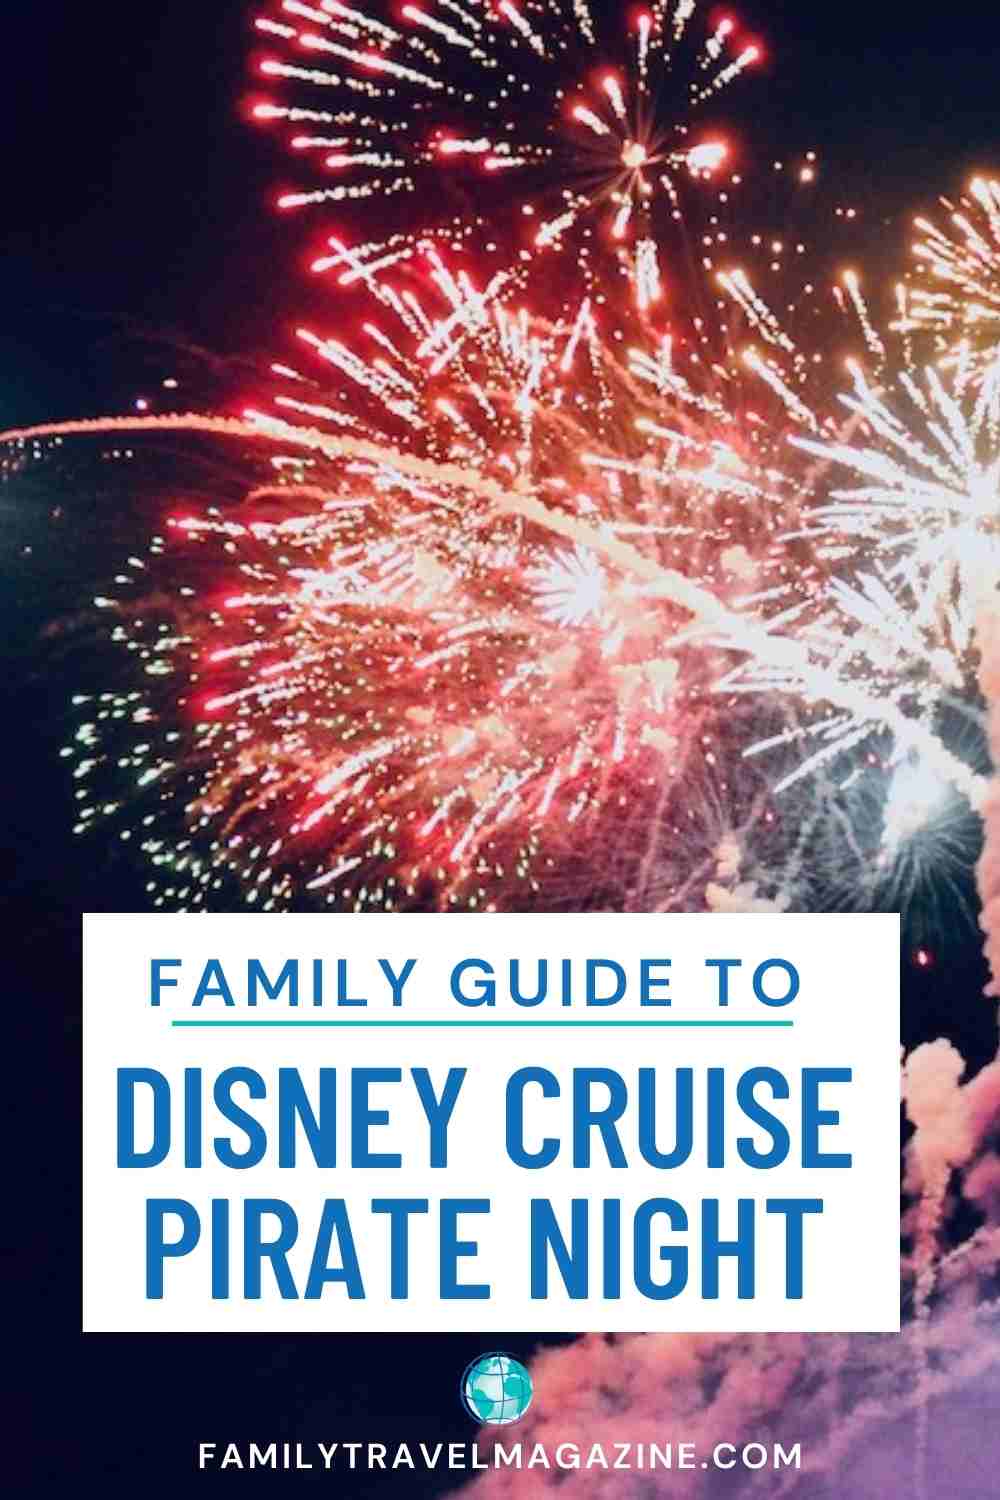 Pirate Night on Disney Cruise Line - The Unofficial Guides